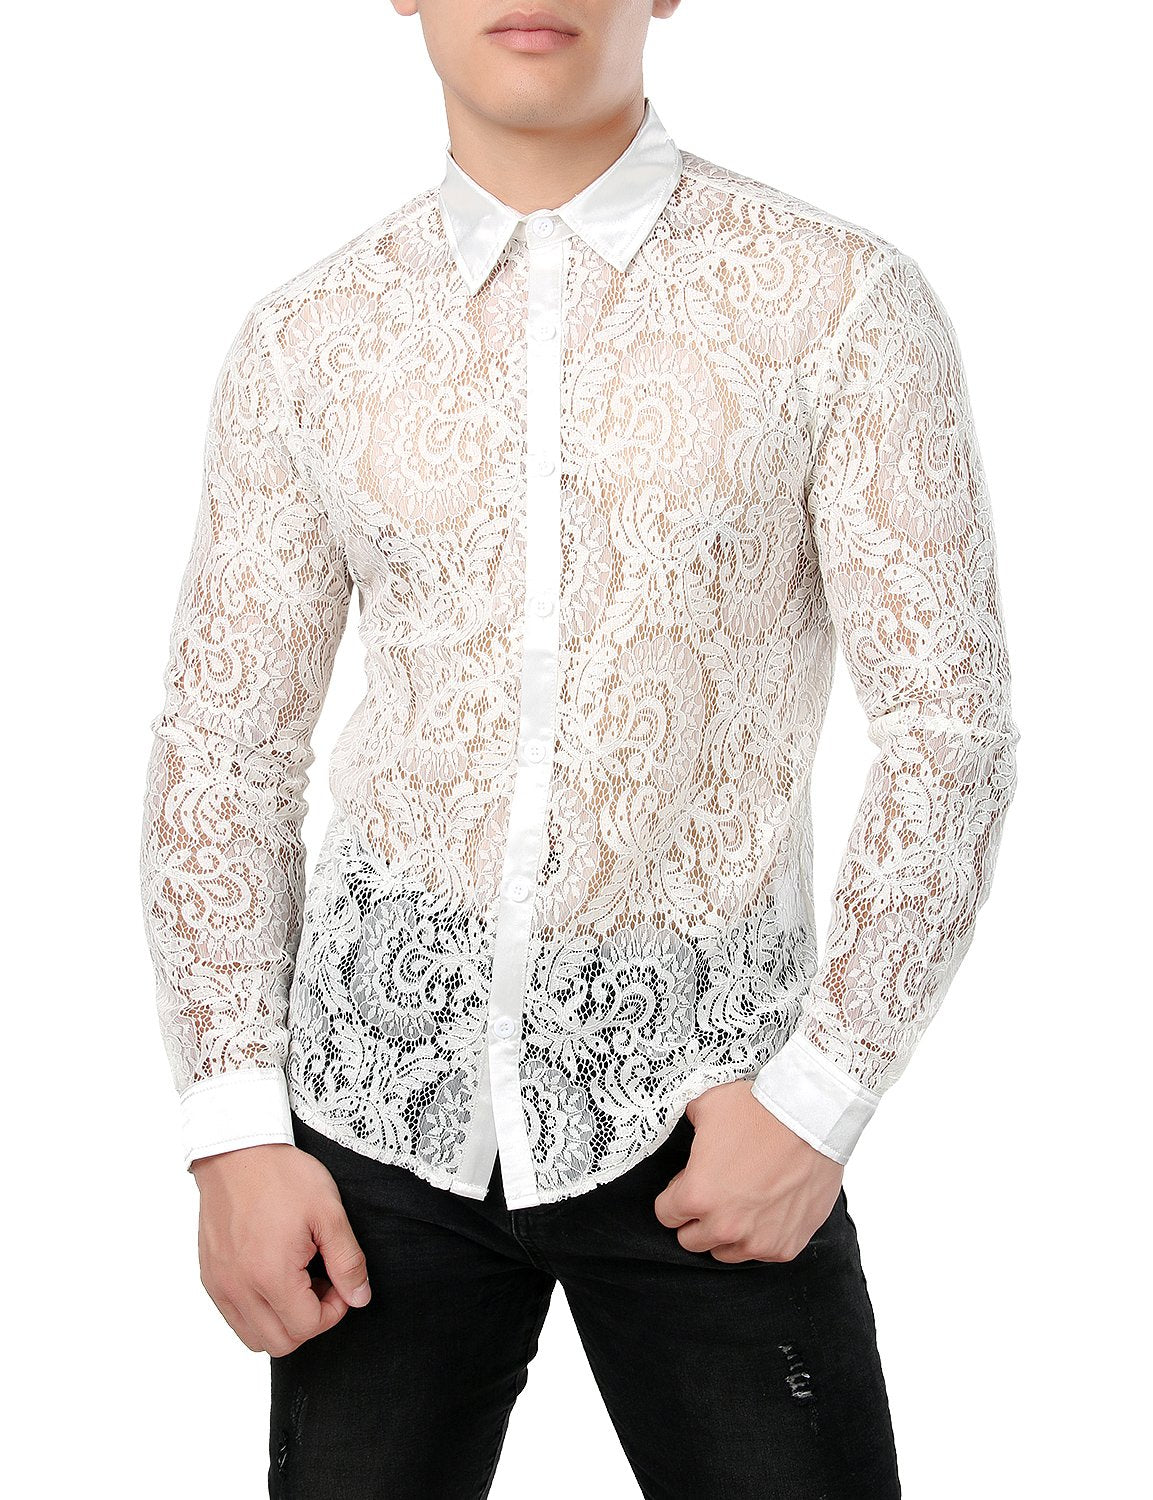 JOGAL Men's Sexy See Through Lace Clubwear Long Sleeve Button Down C